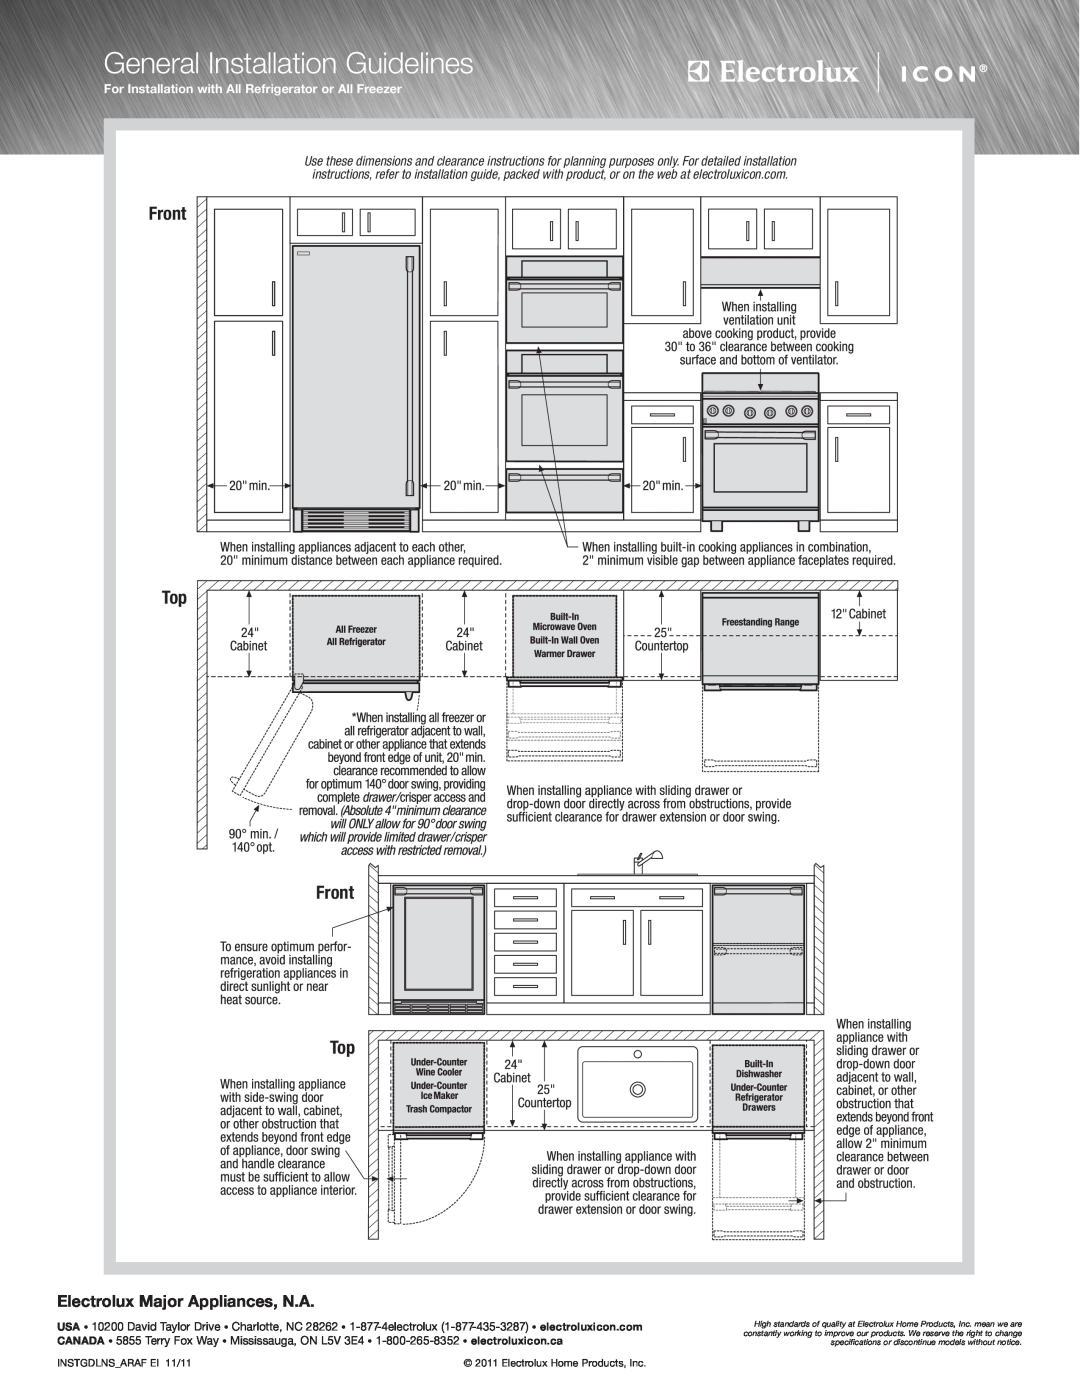 Electrolux E32AR75JPS specifications General Installation Guidelines, Front, Electrolux Major Appliances, N.A 